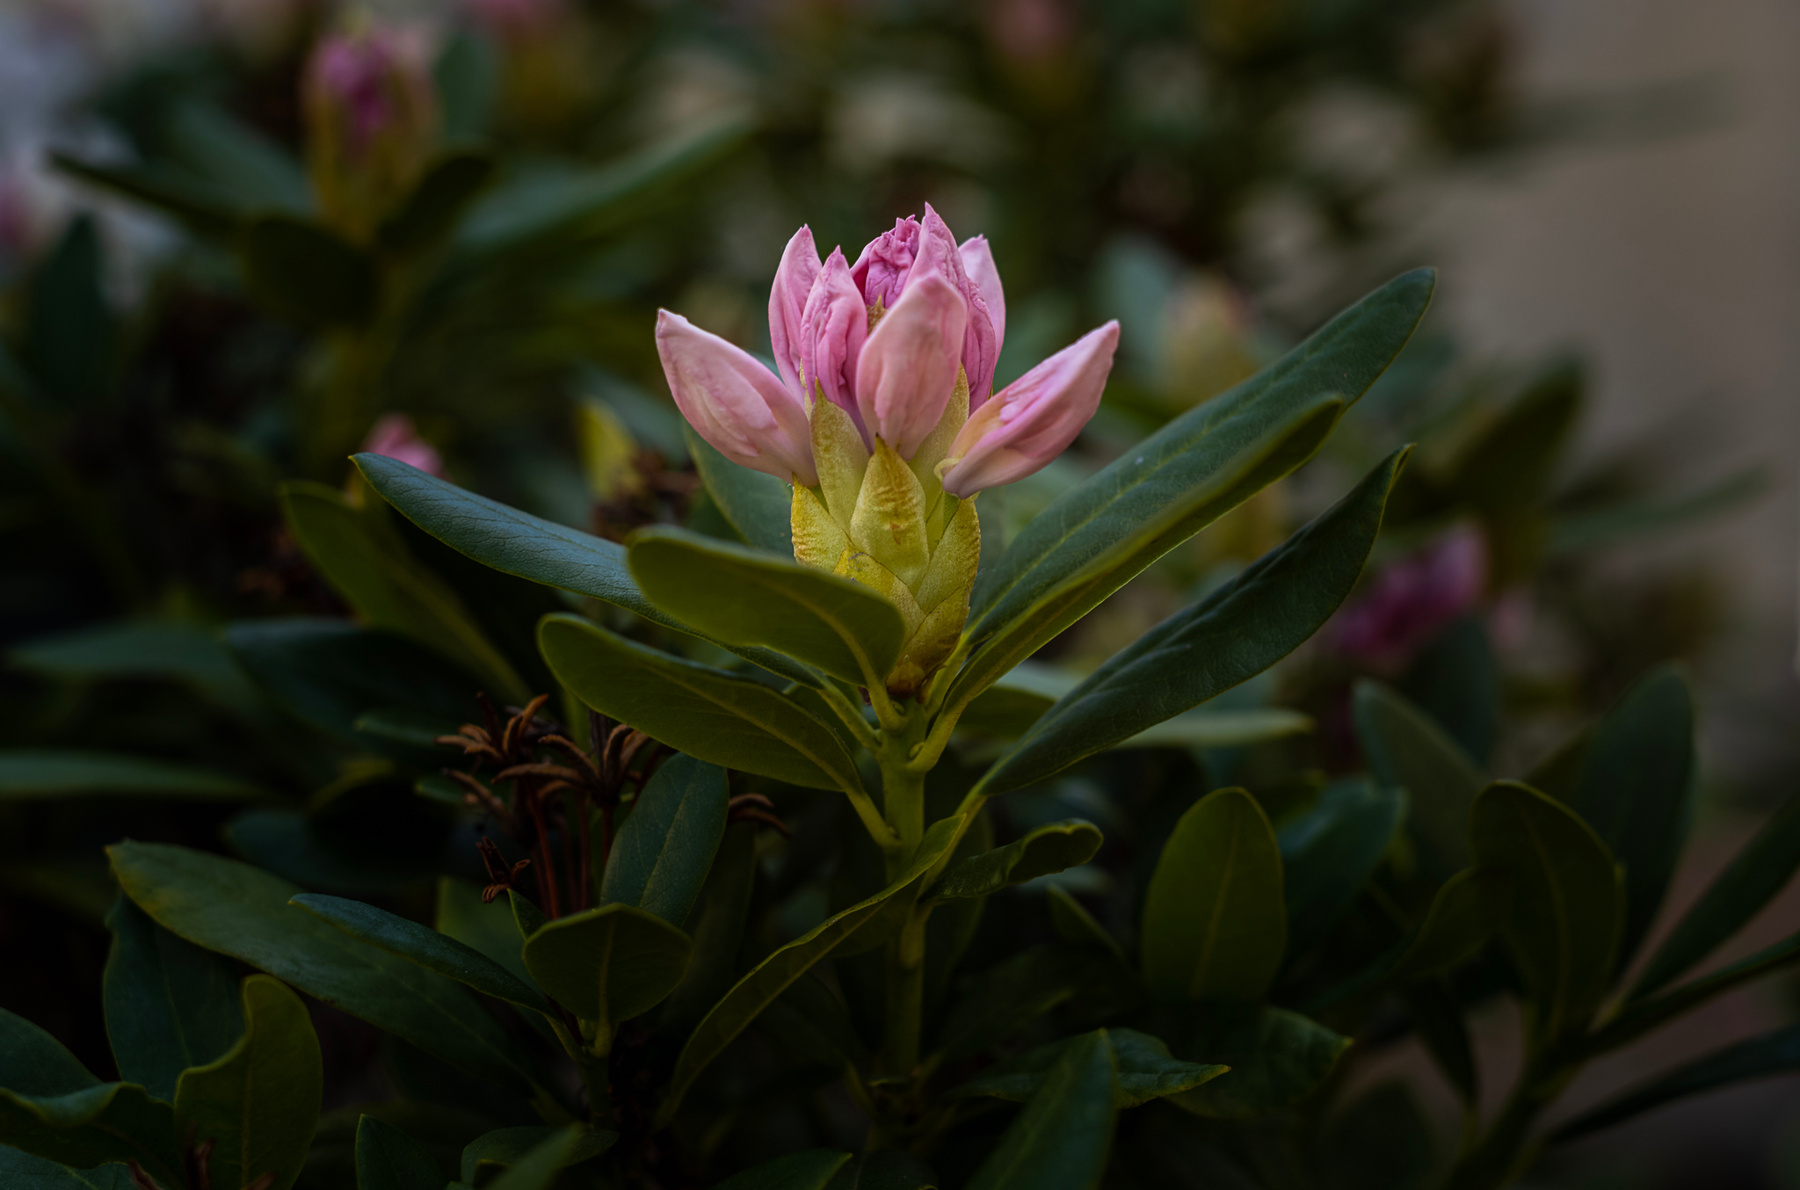 Rhododendron Rhododendron цветы flower disfoto leica summicron nature